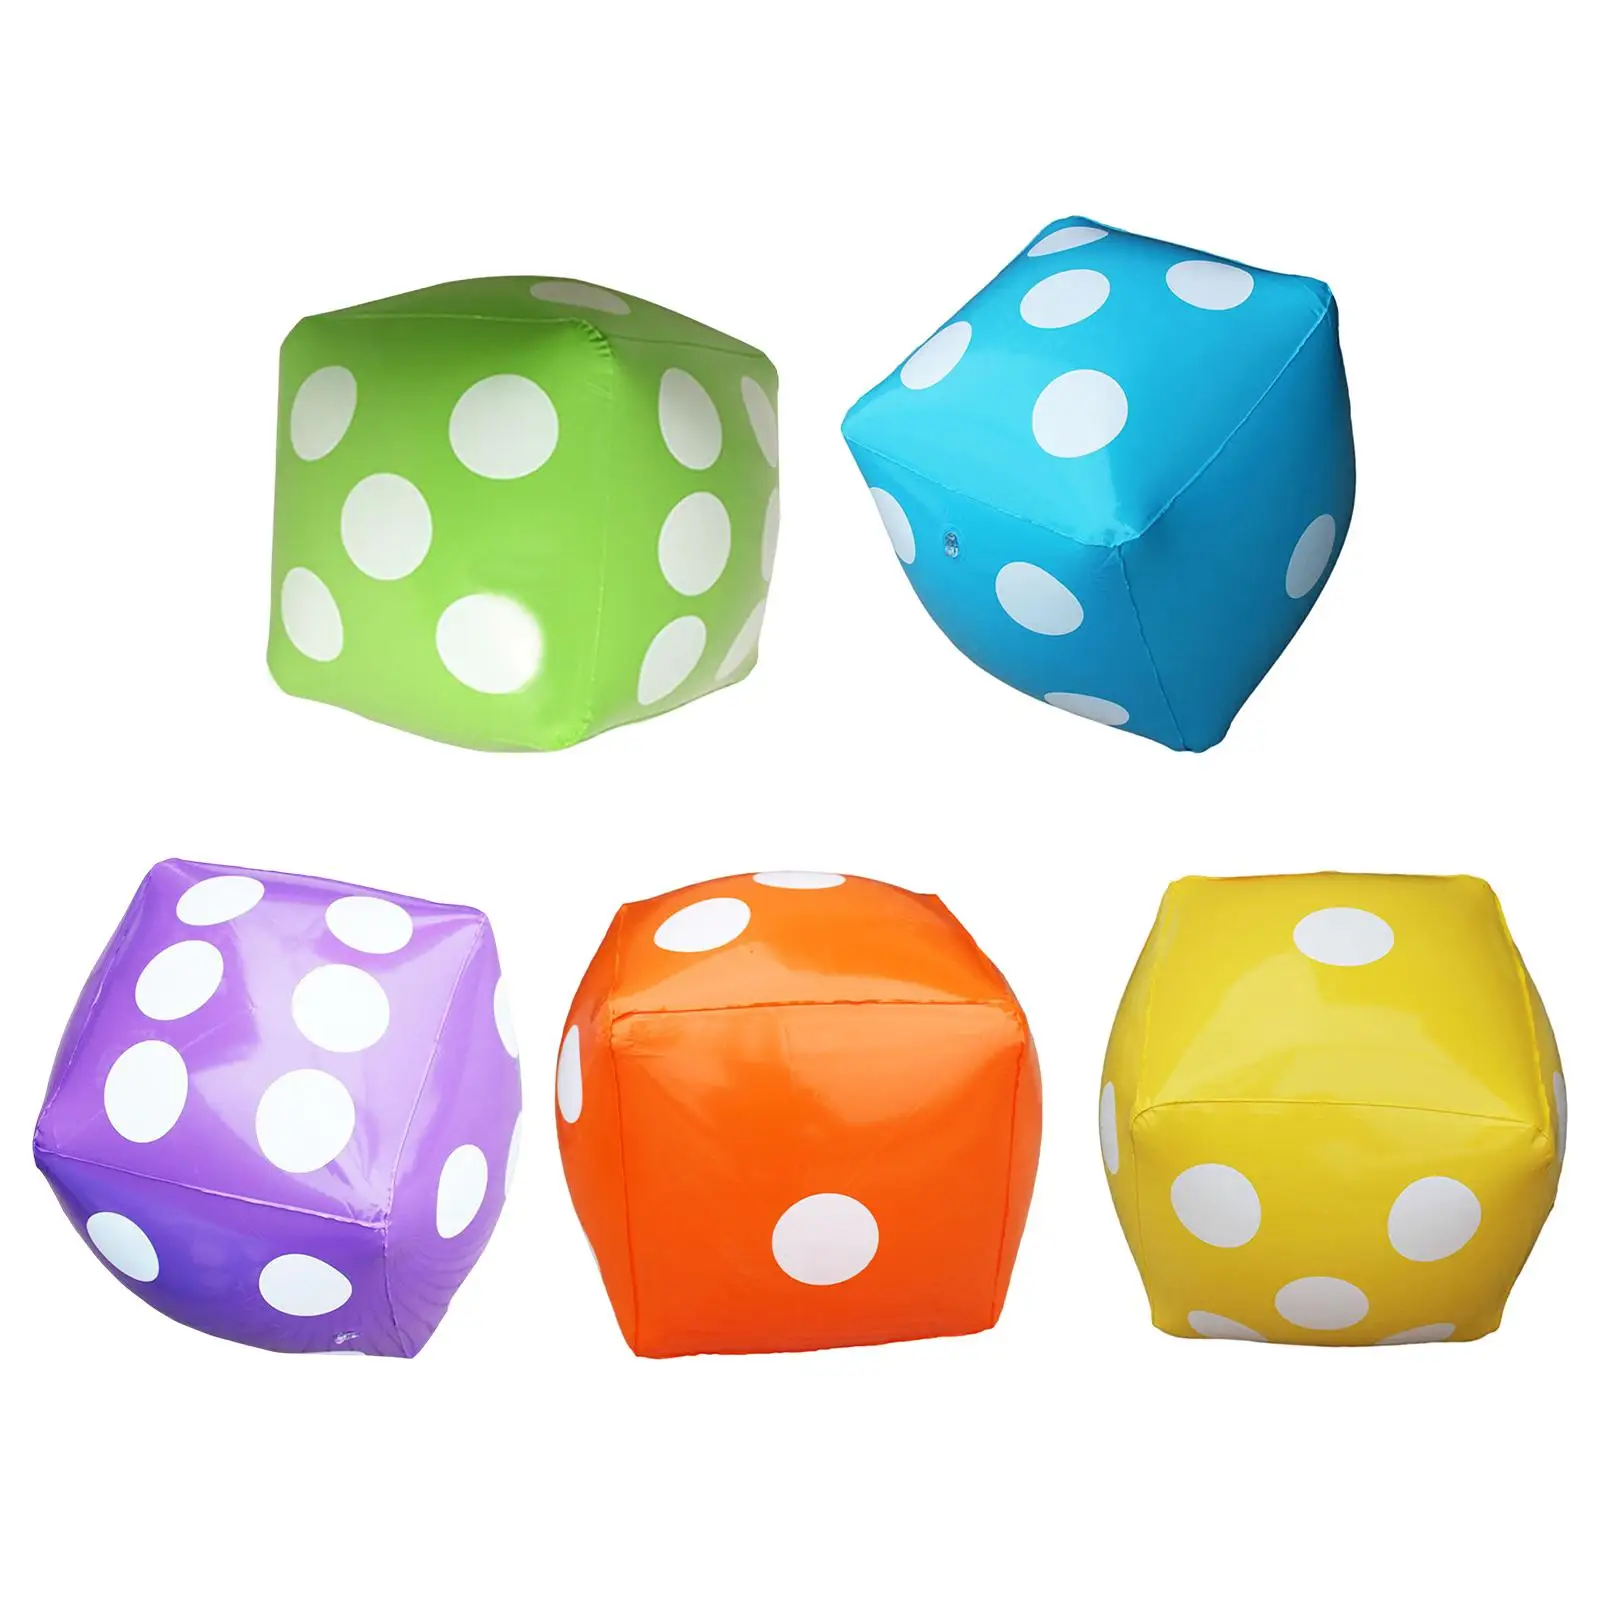 Giant Inflatable Dice 60cm Cube Novelty Decoration Jumbo Inflatable Dice for Club Family Game Kids Toys Pools Outdoor Activities